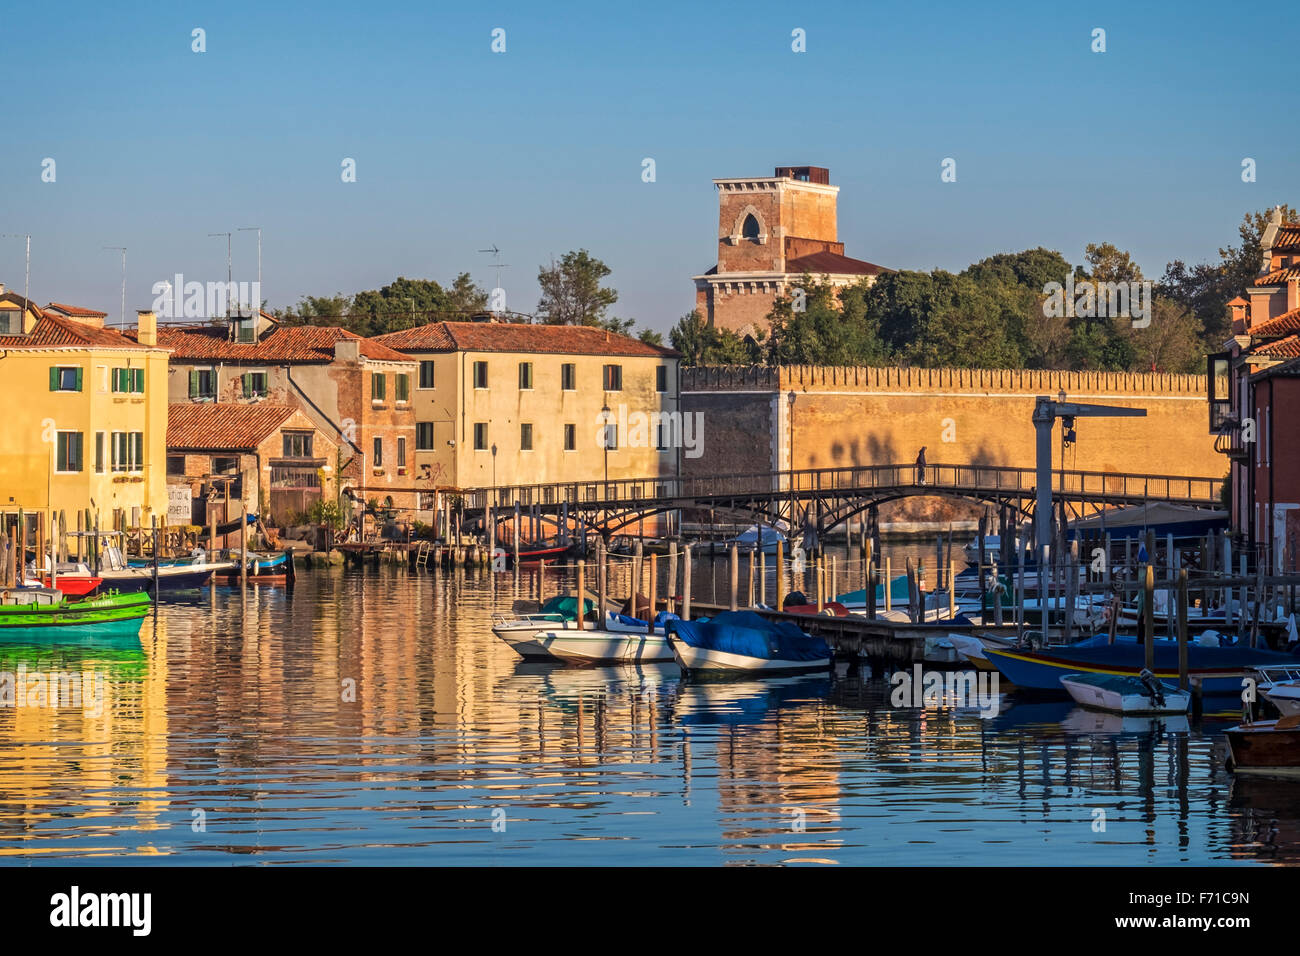 Venice, Castello, Sestiere, Italy - Harbour view - Traditional houses, boats, reflections and warm colours Stock Photo